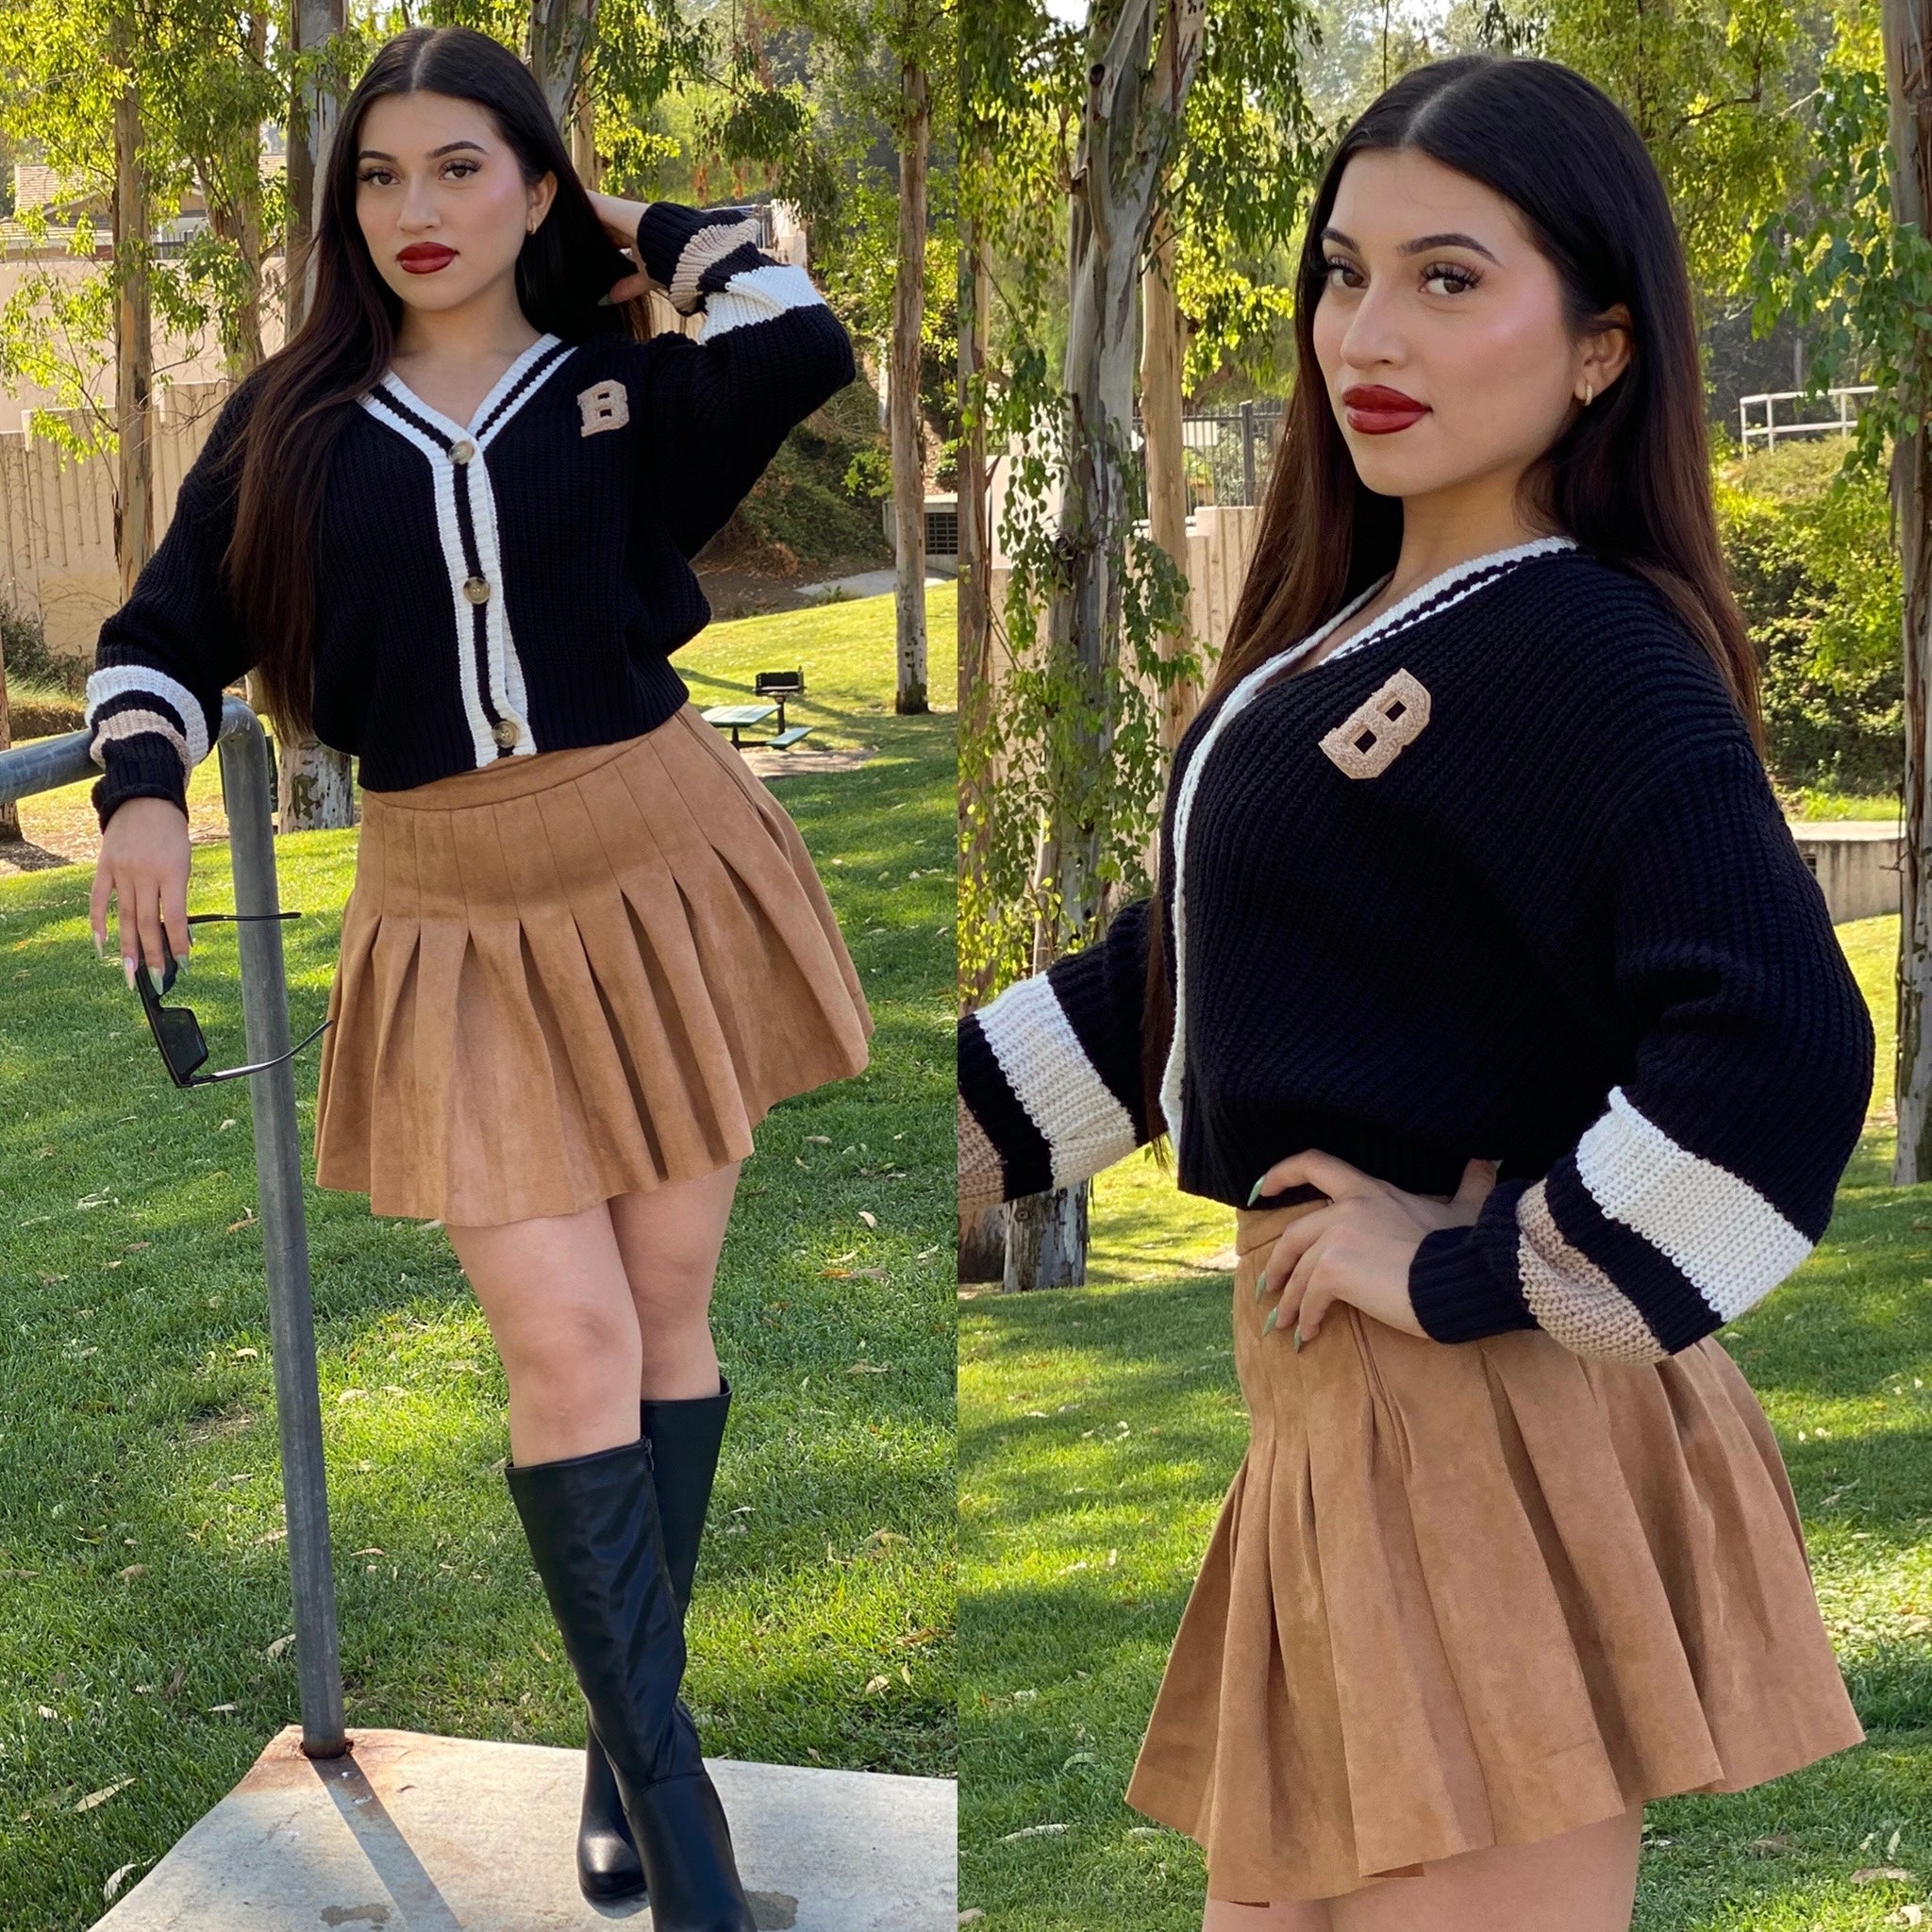 The “I’ll Cheer U On” Suede Pleaded Skirt